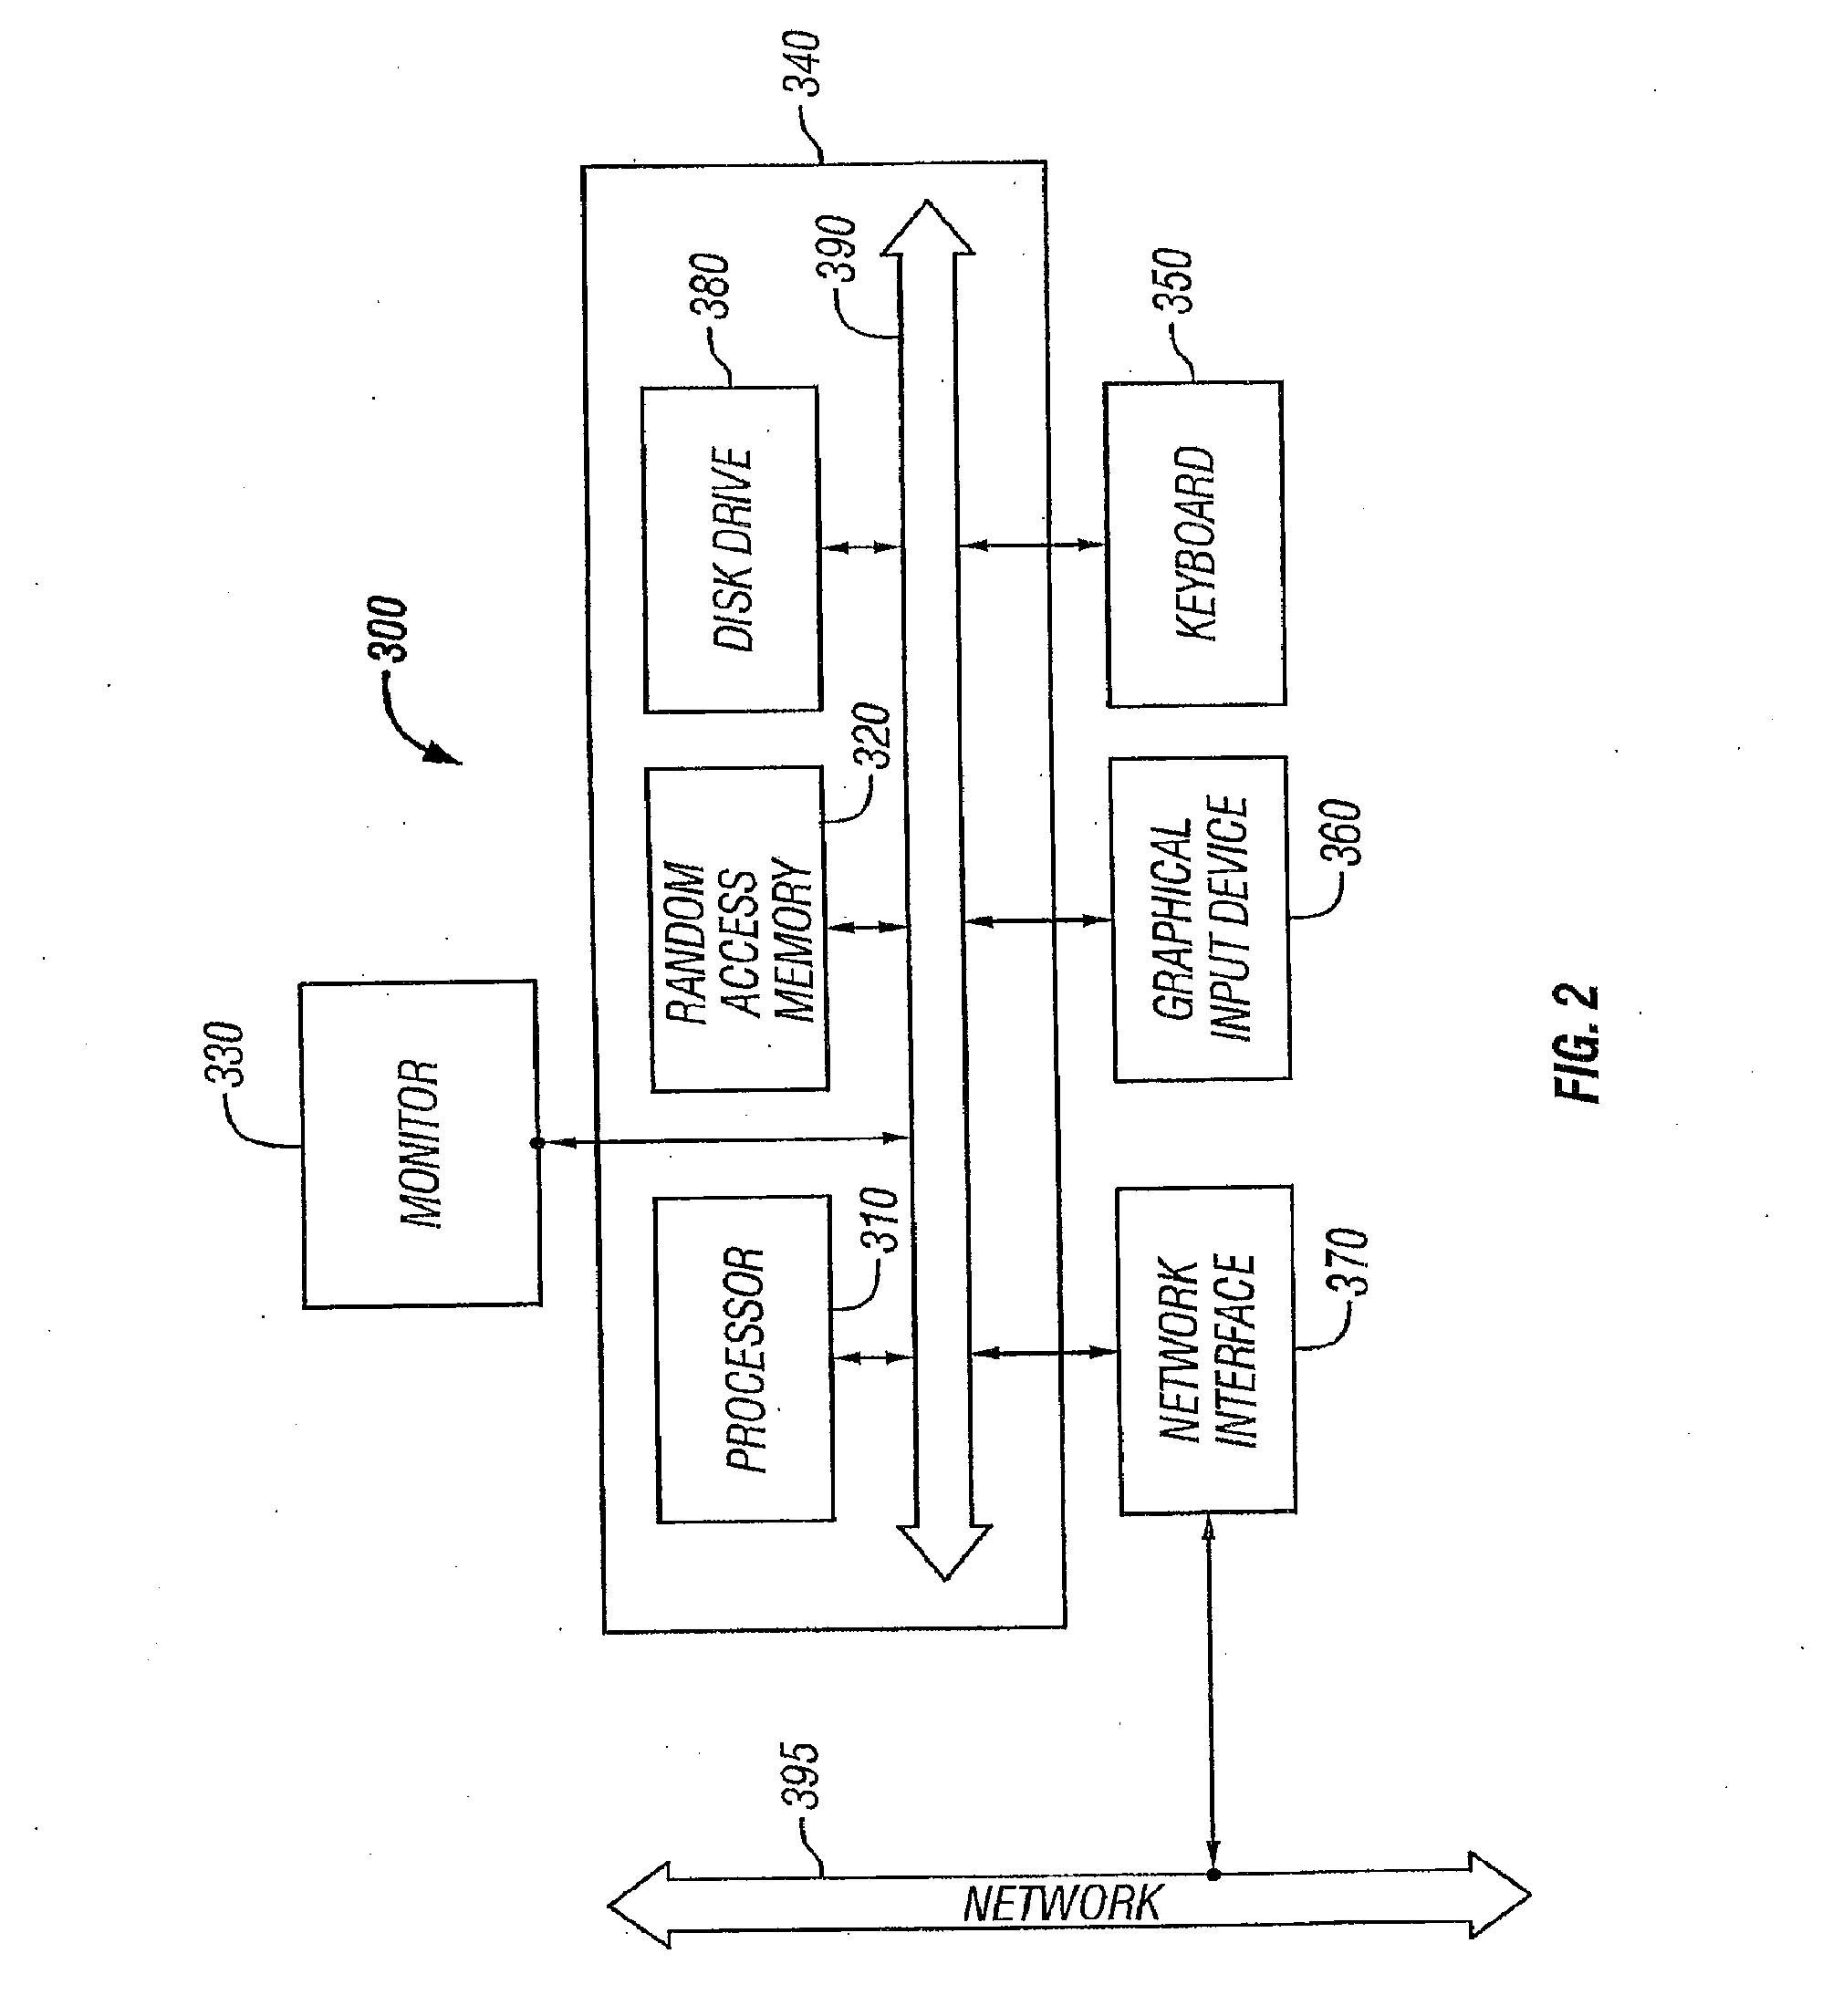 Method for operating an integrated point of presence server network